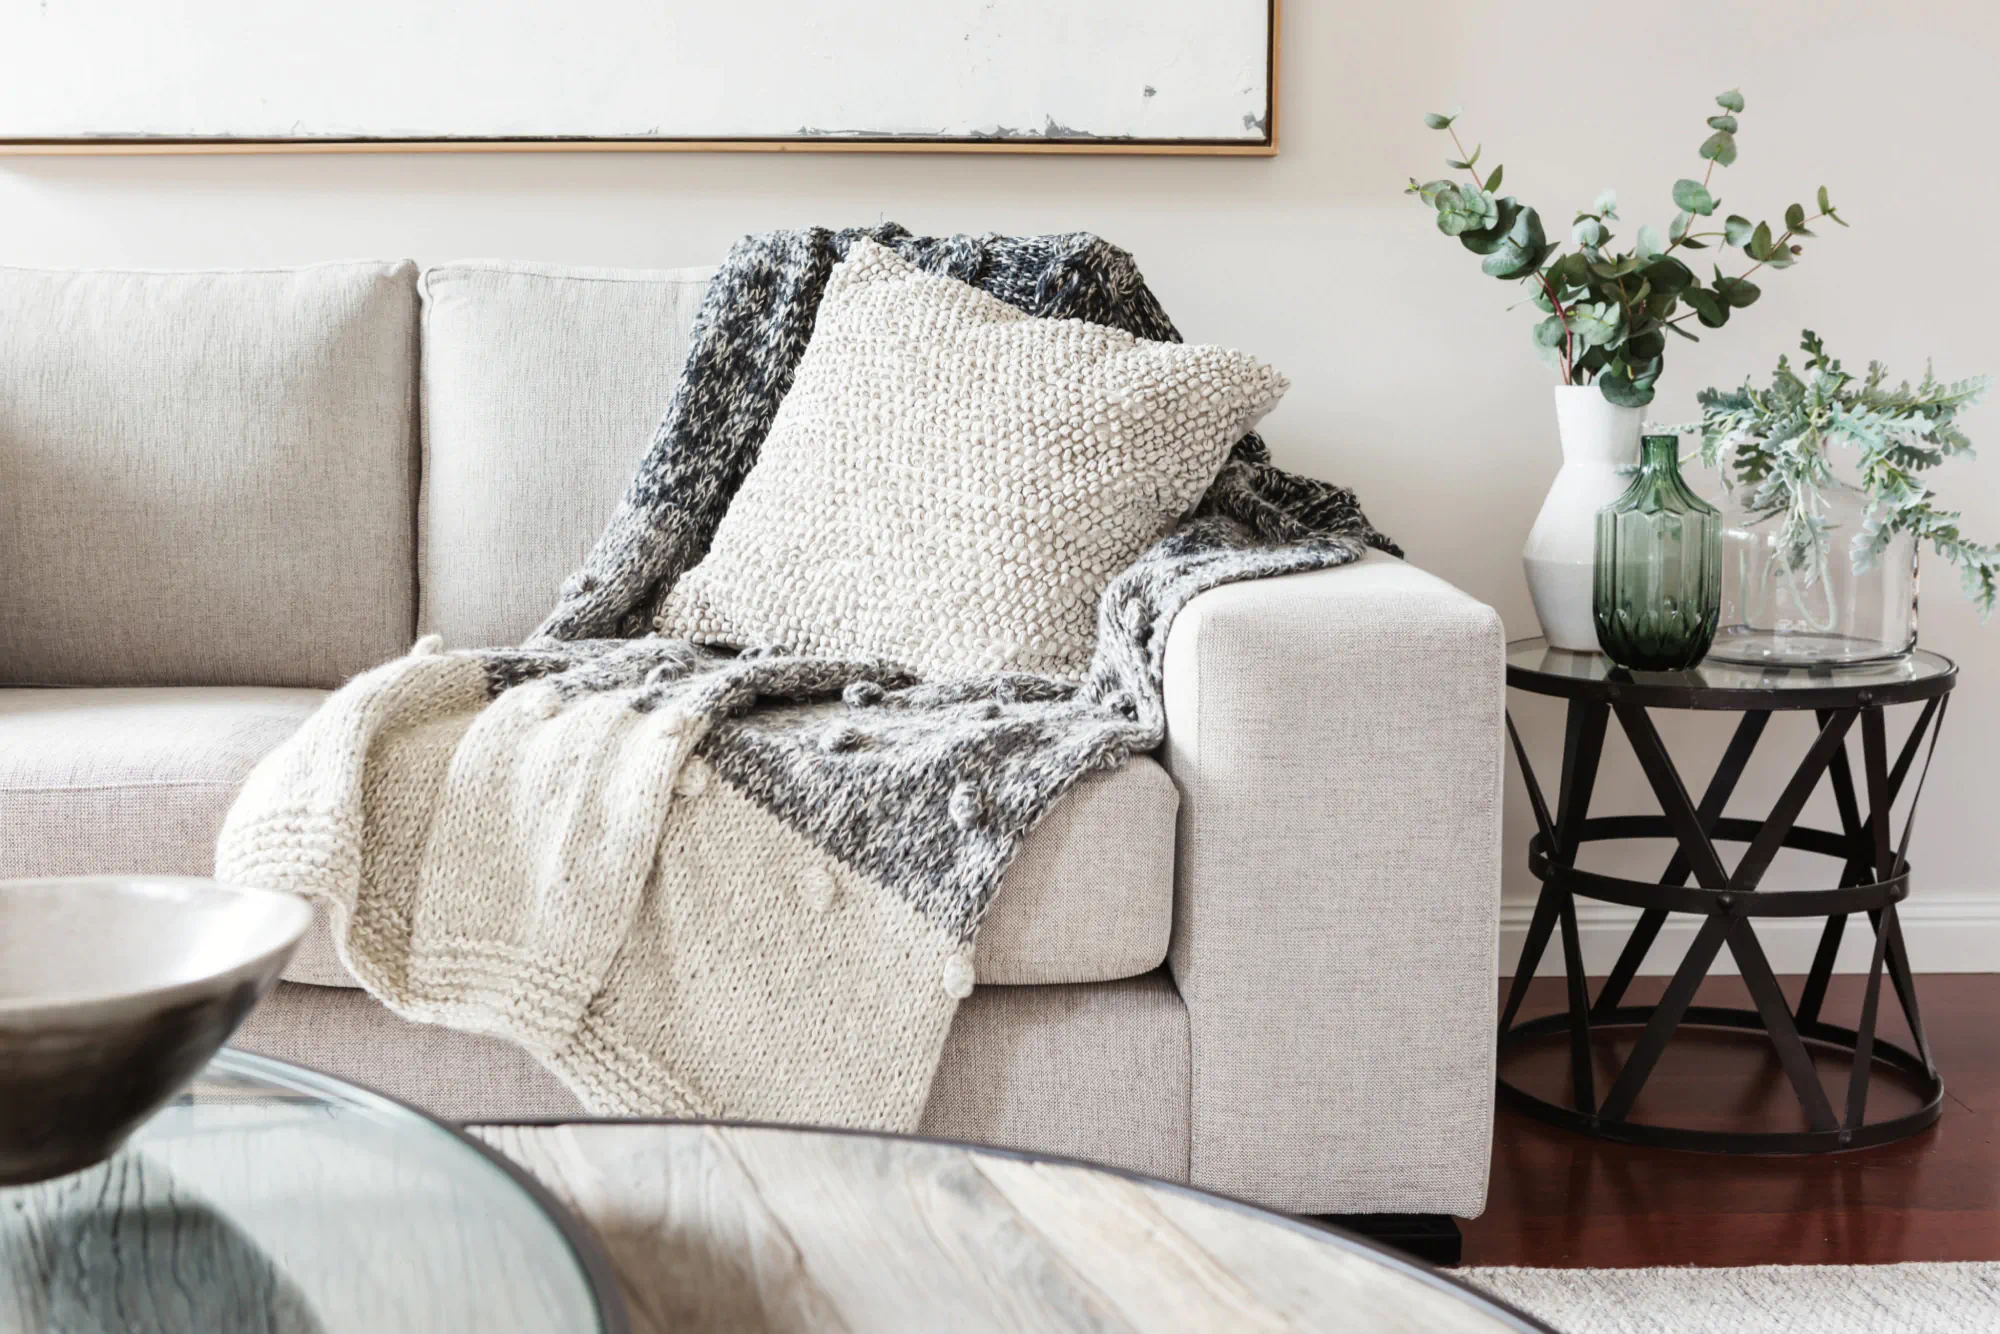 Cream couch with textured blankets and pillows in neutral colors.